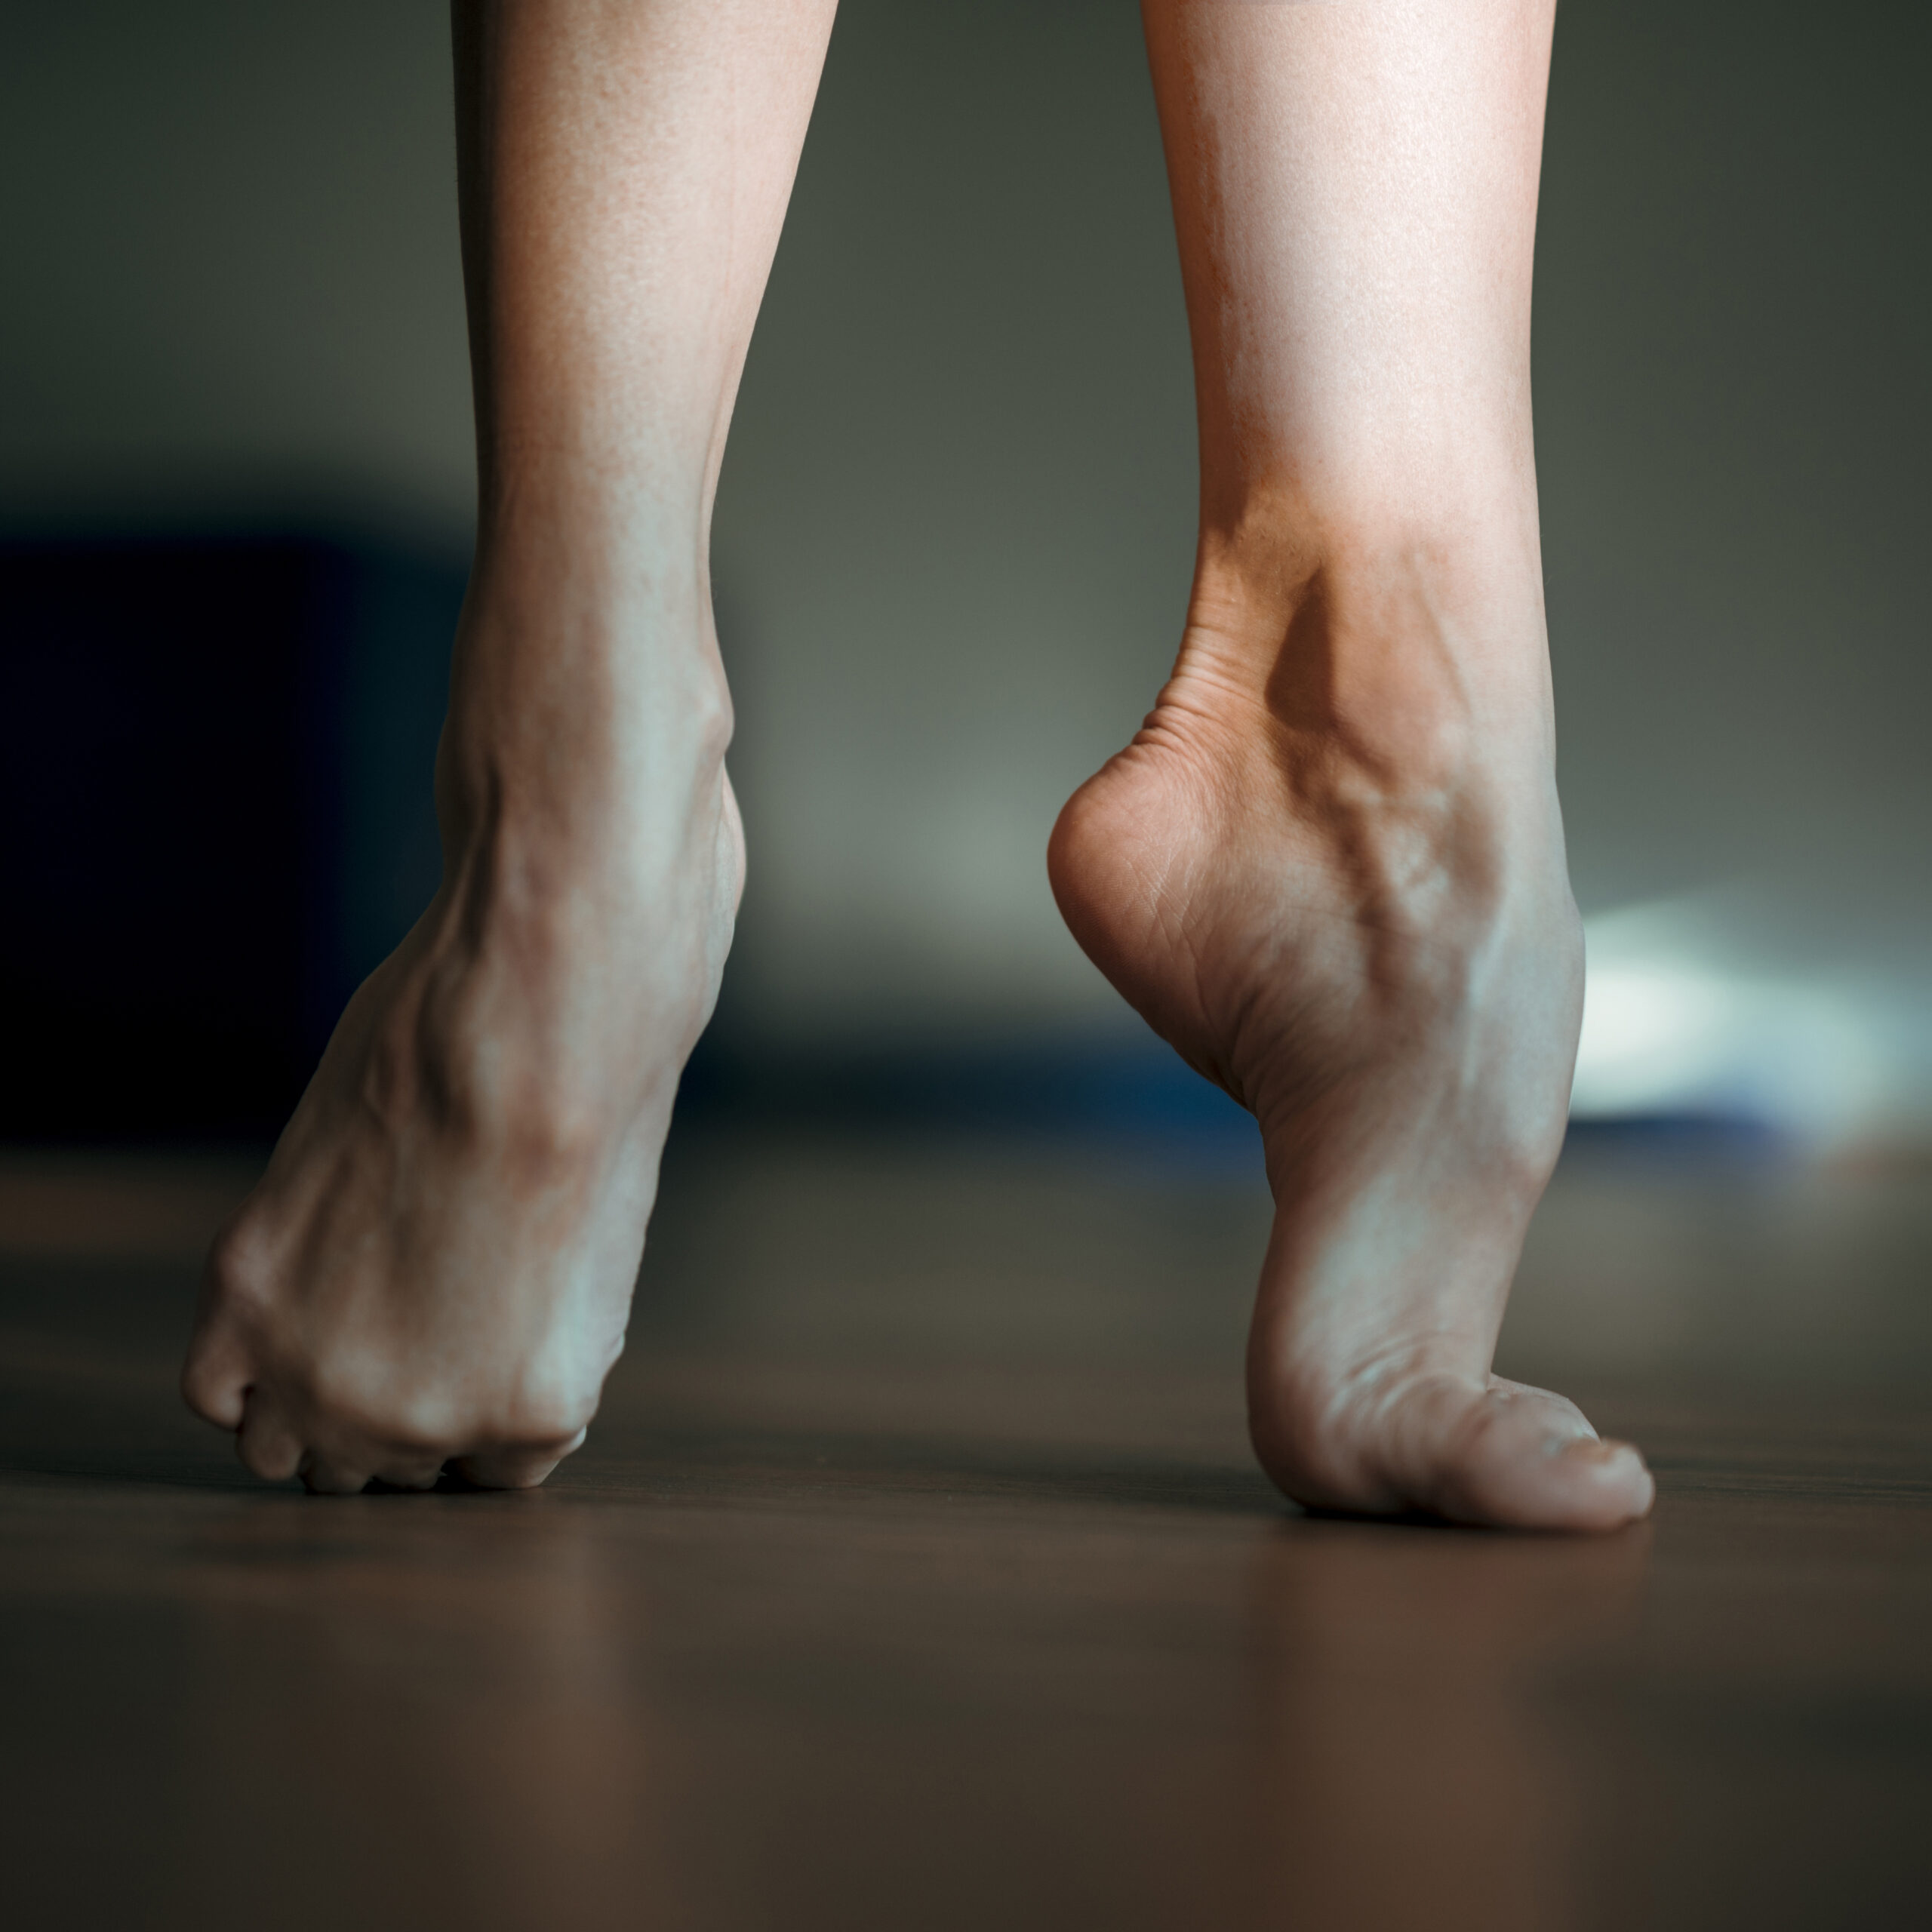 Bone Spur Treatment, Symptoms, and Prevention | Preferred Foot & Ankle